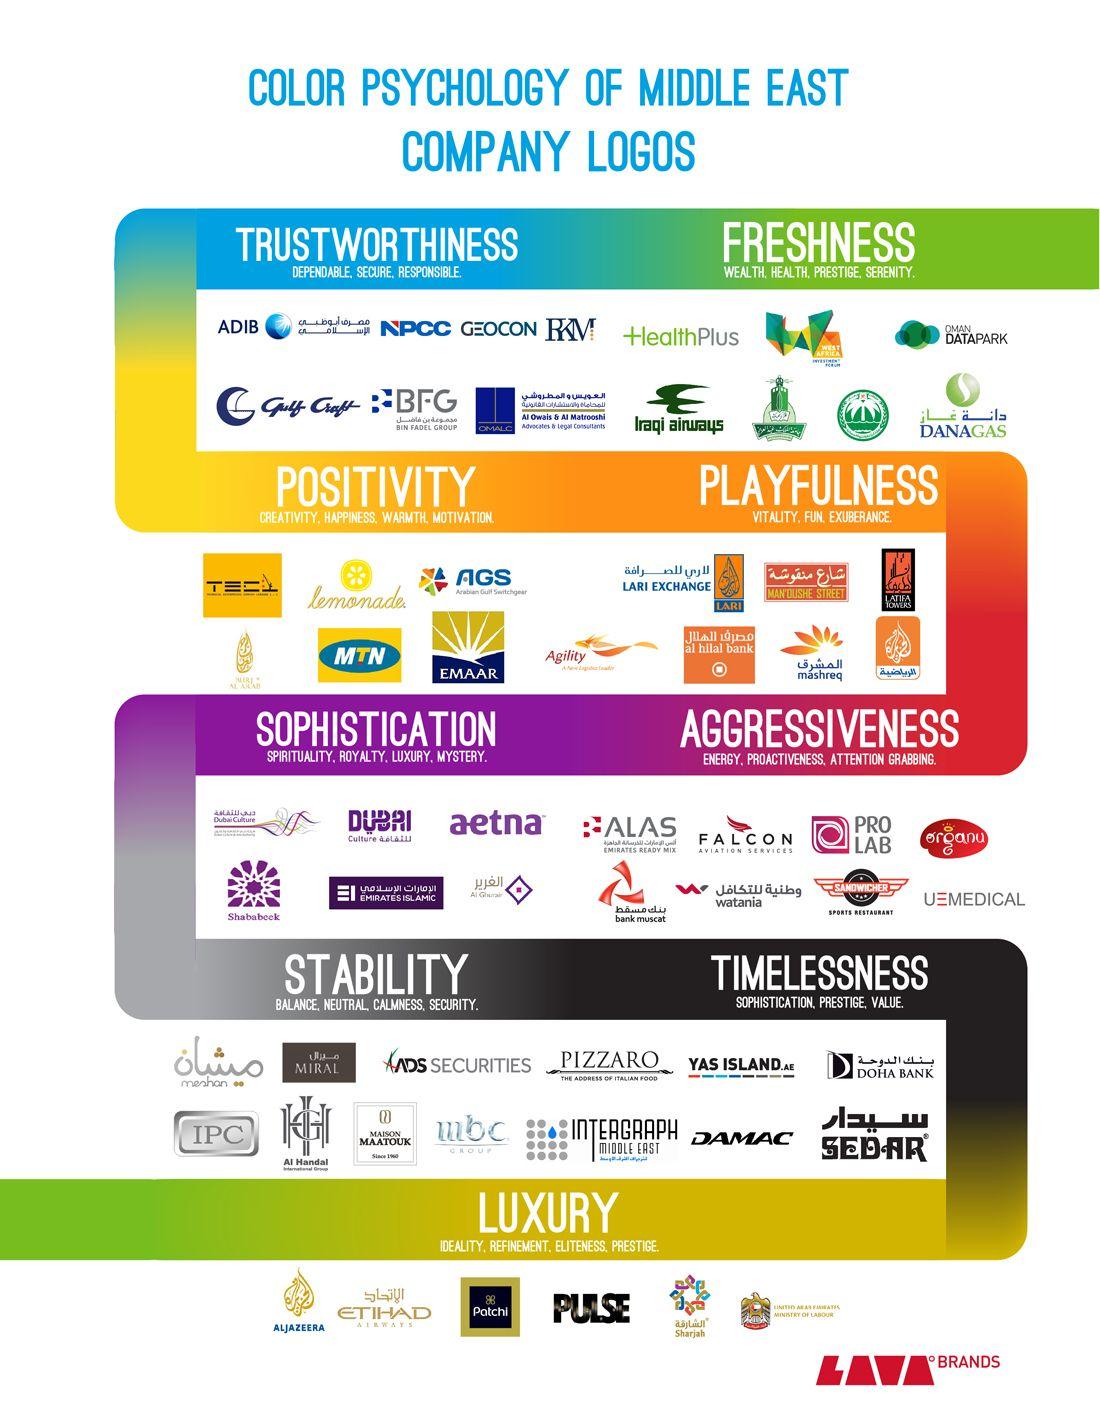 Color Company Logo - COLOR PSYCHOLOGY OF MIDDLE EAST COMPANY LOGOS [Infographic]